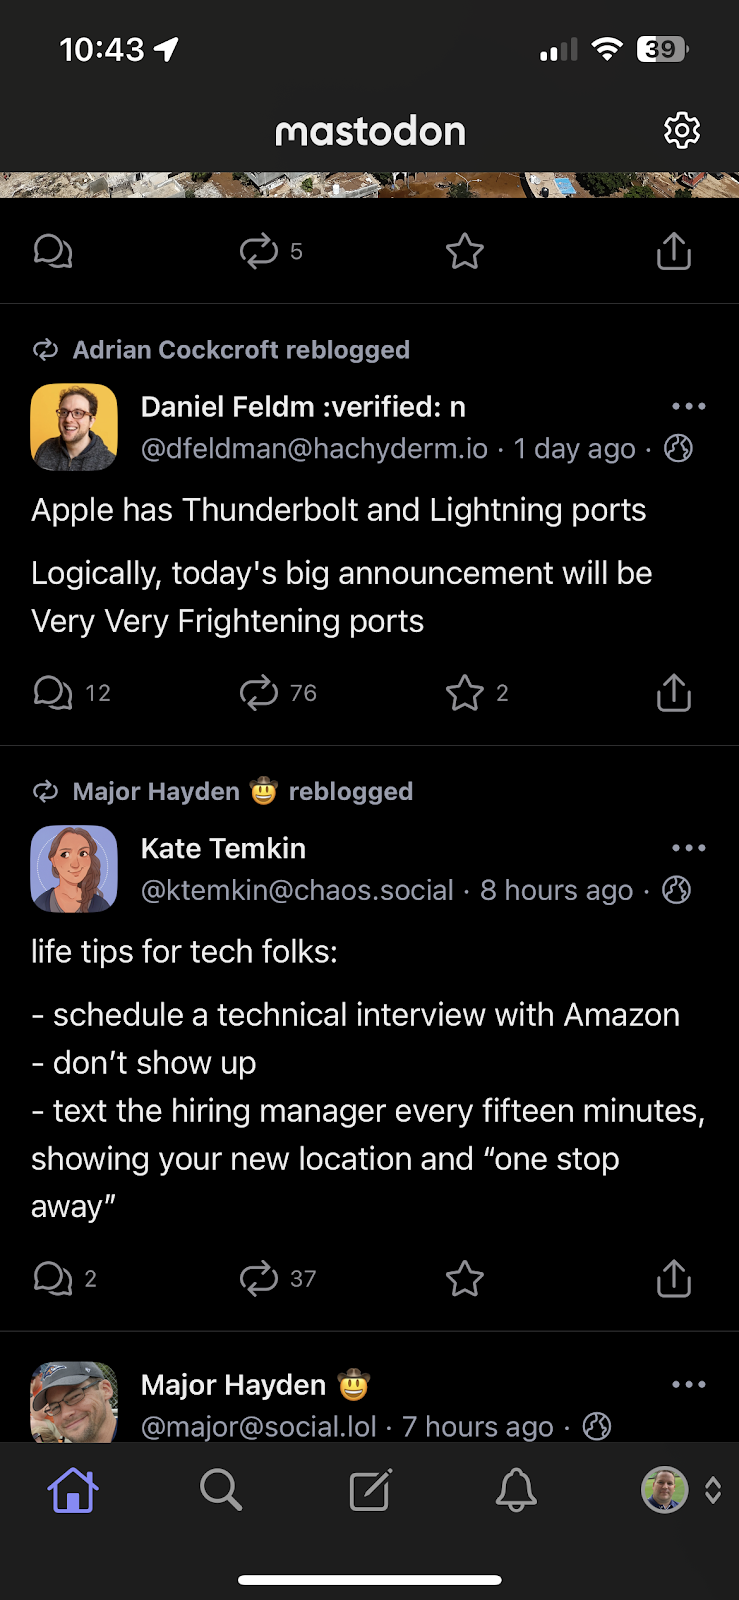 Two posts back to back on Mastodon. 

The first, “Apple has Thunderbolt and Lightning ports Logically, today’s big announcment is Very Very Frightening ports”

The second “Life tips for tech folks:

schedule a technical interview ith Amazon.

don’t show up

text the hiring manager every fifteen minutes, showing your new location and “one stop away”